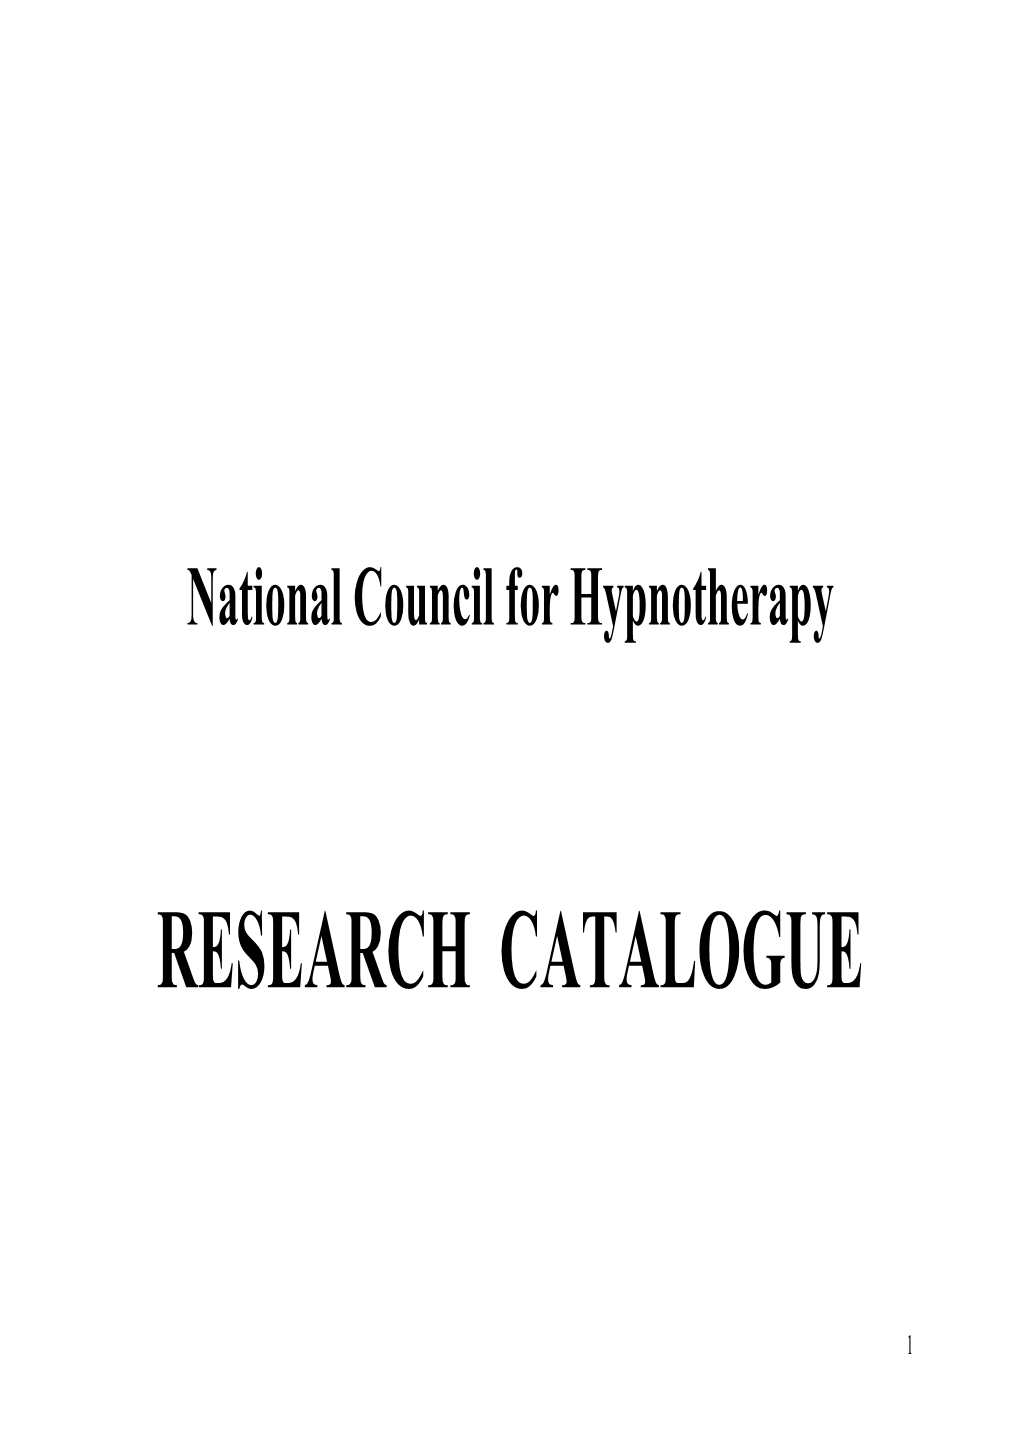 Research Catalogue